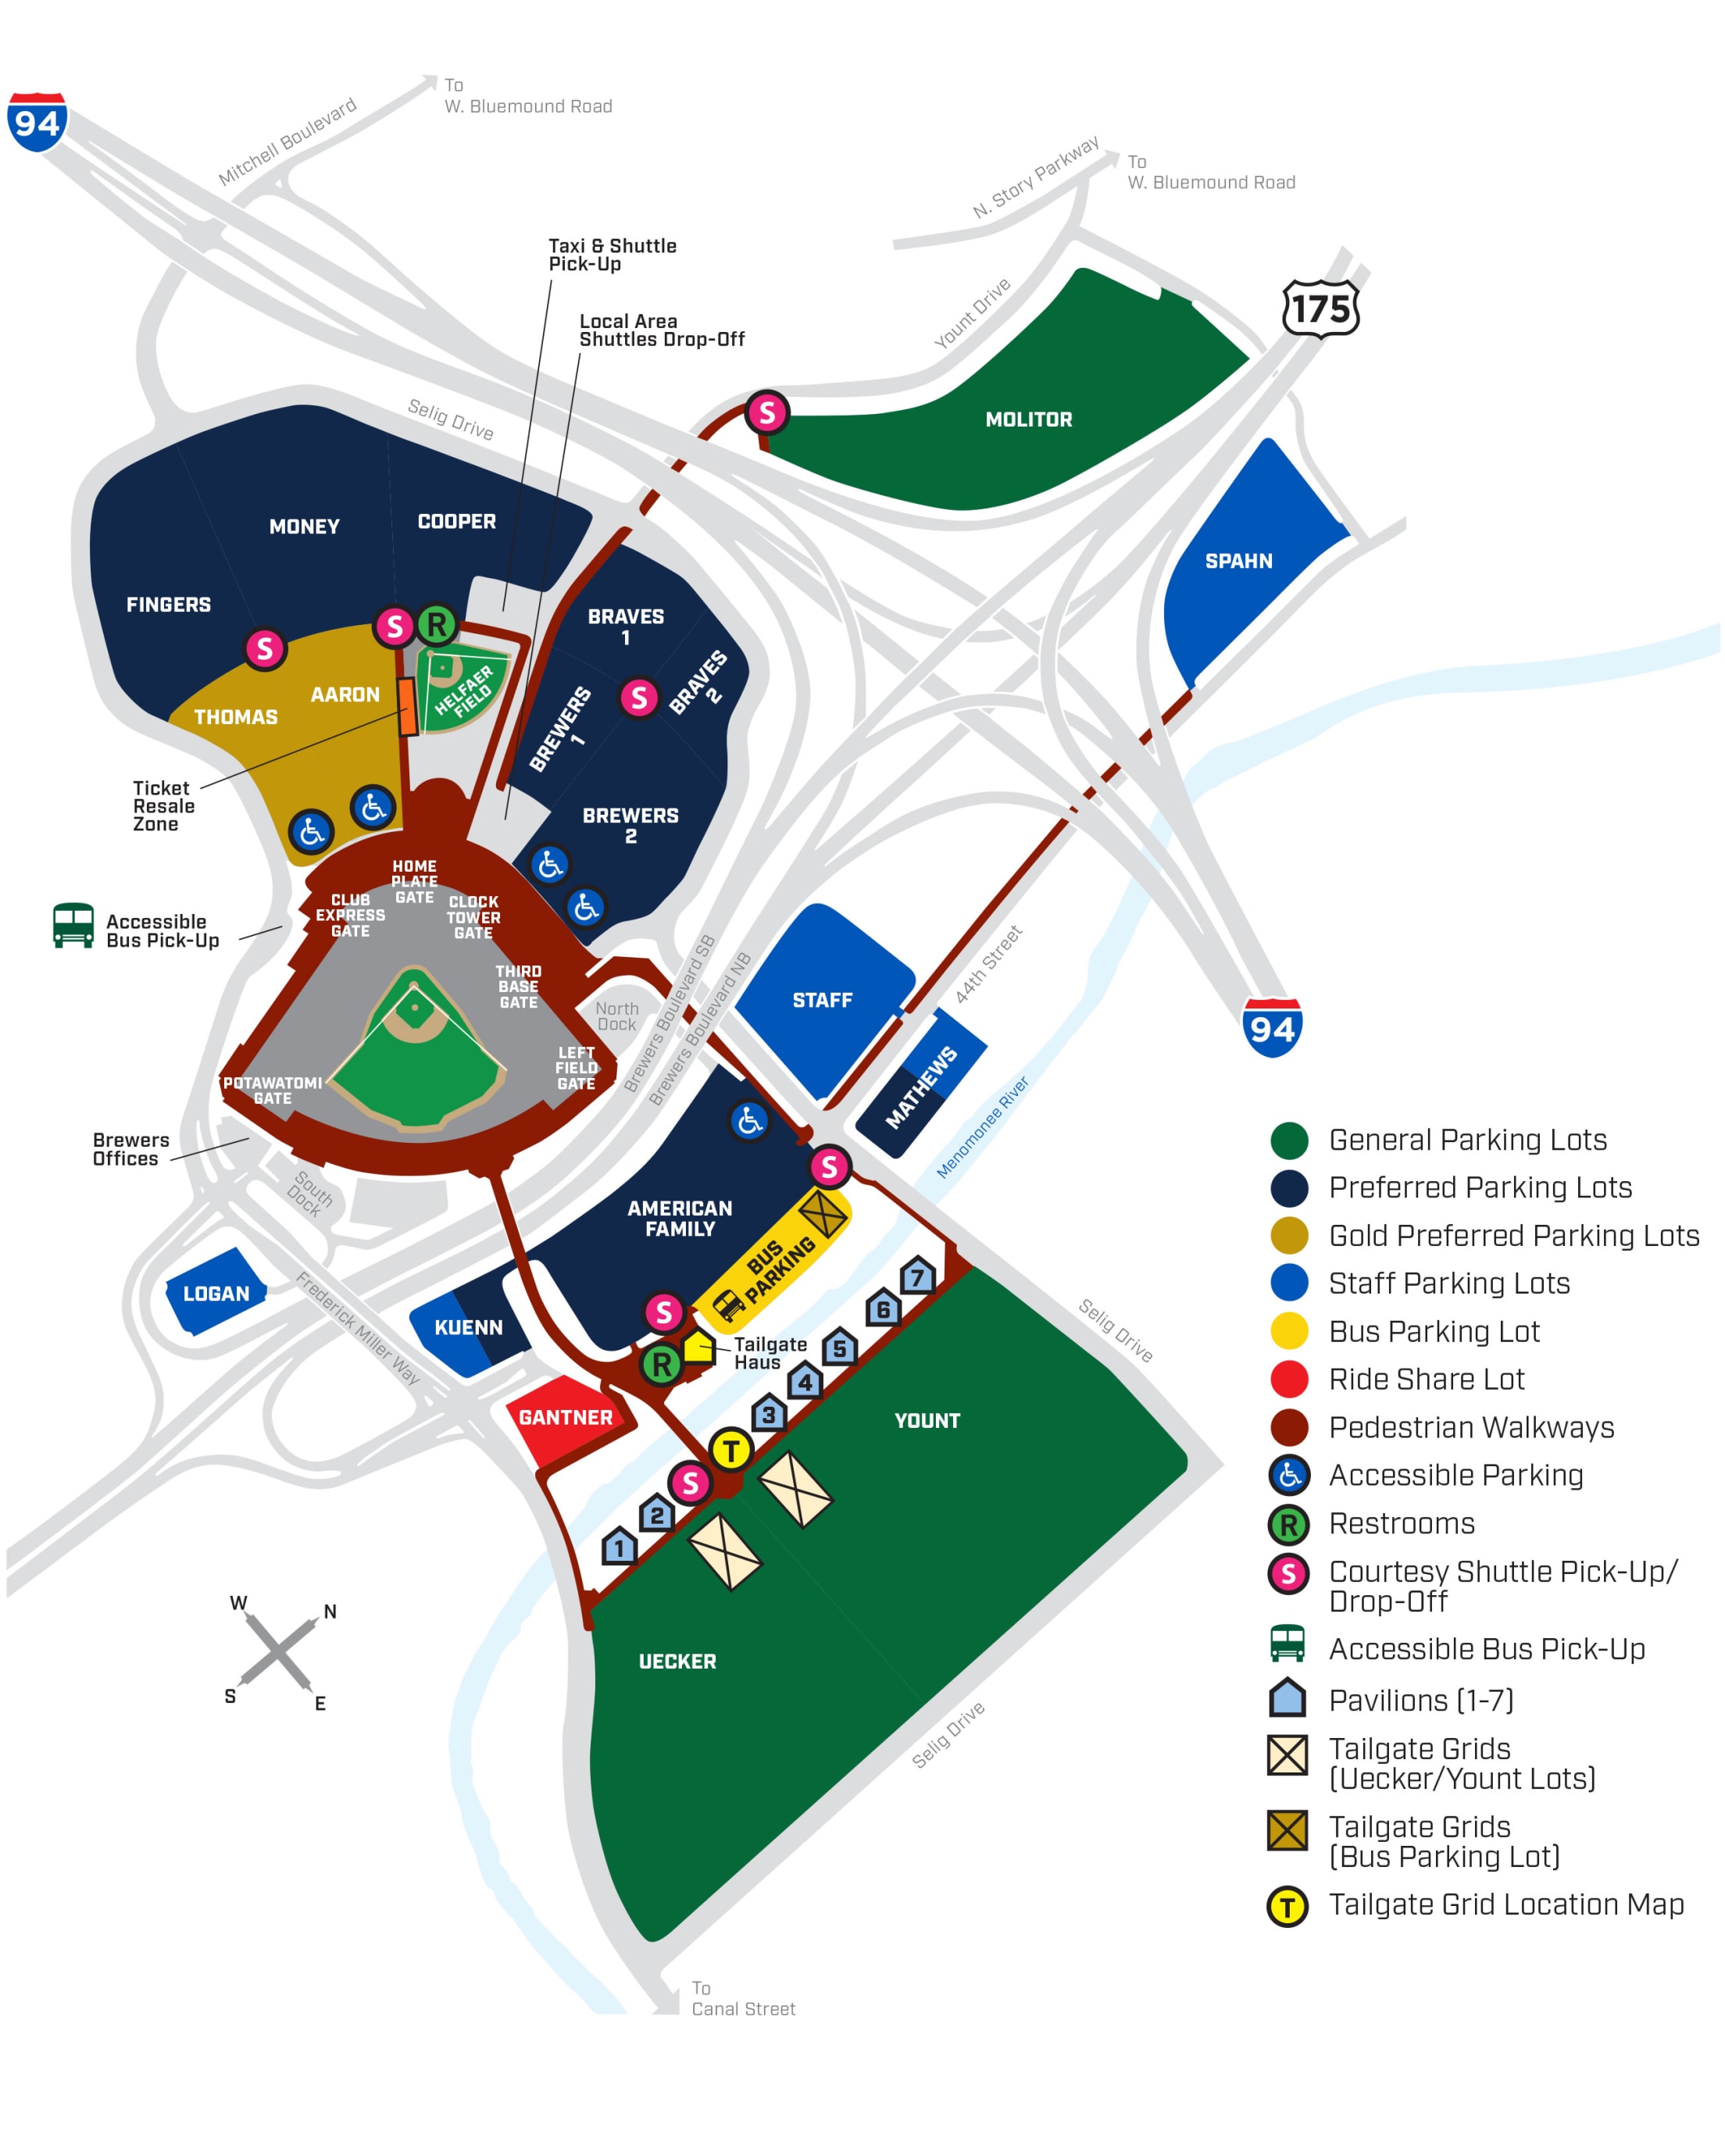 Where to Park at American Family Field